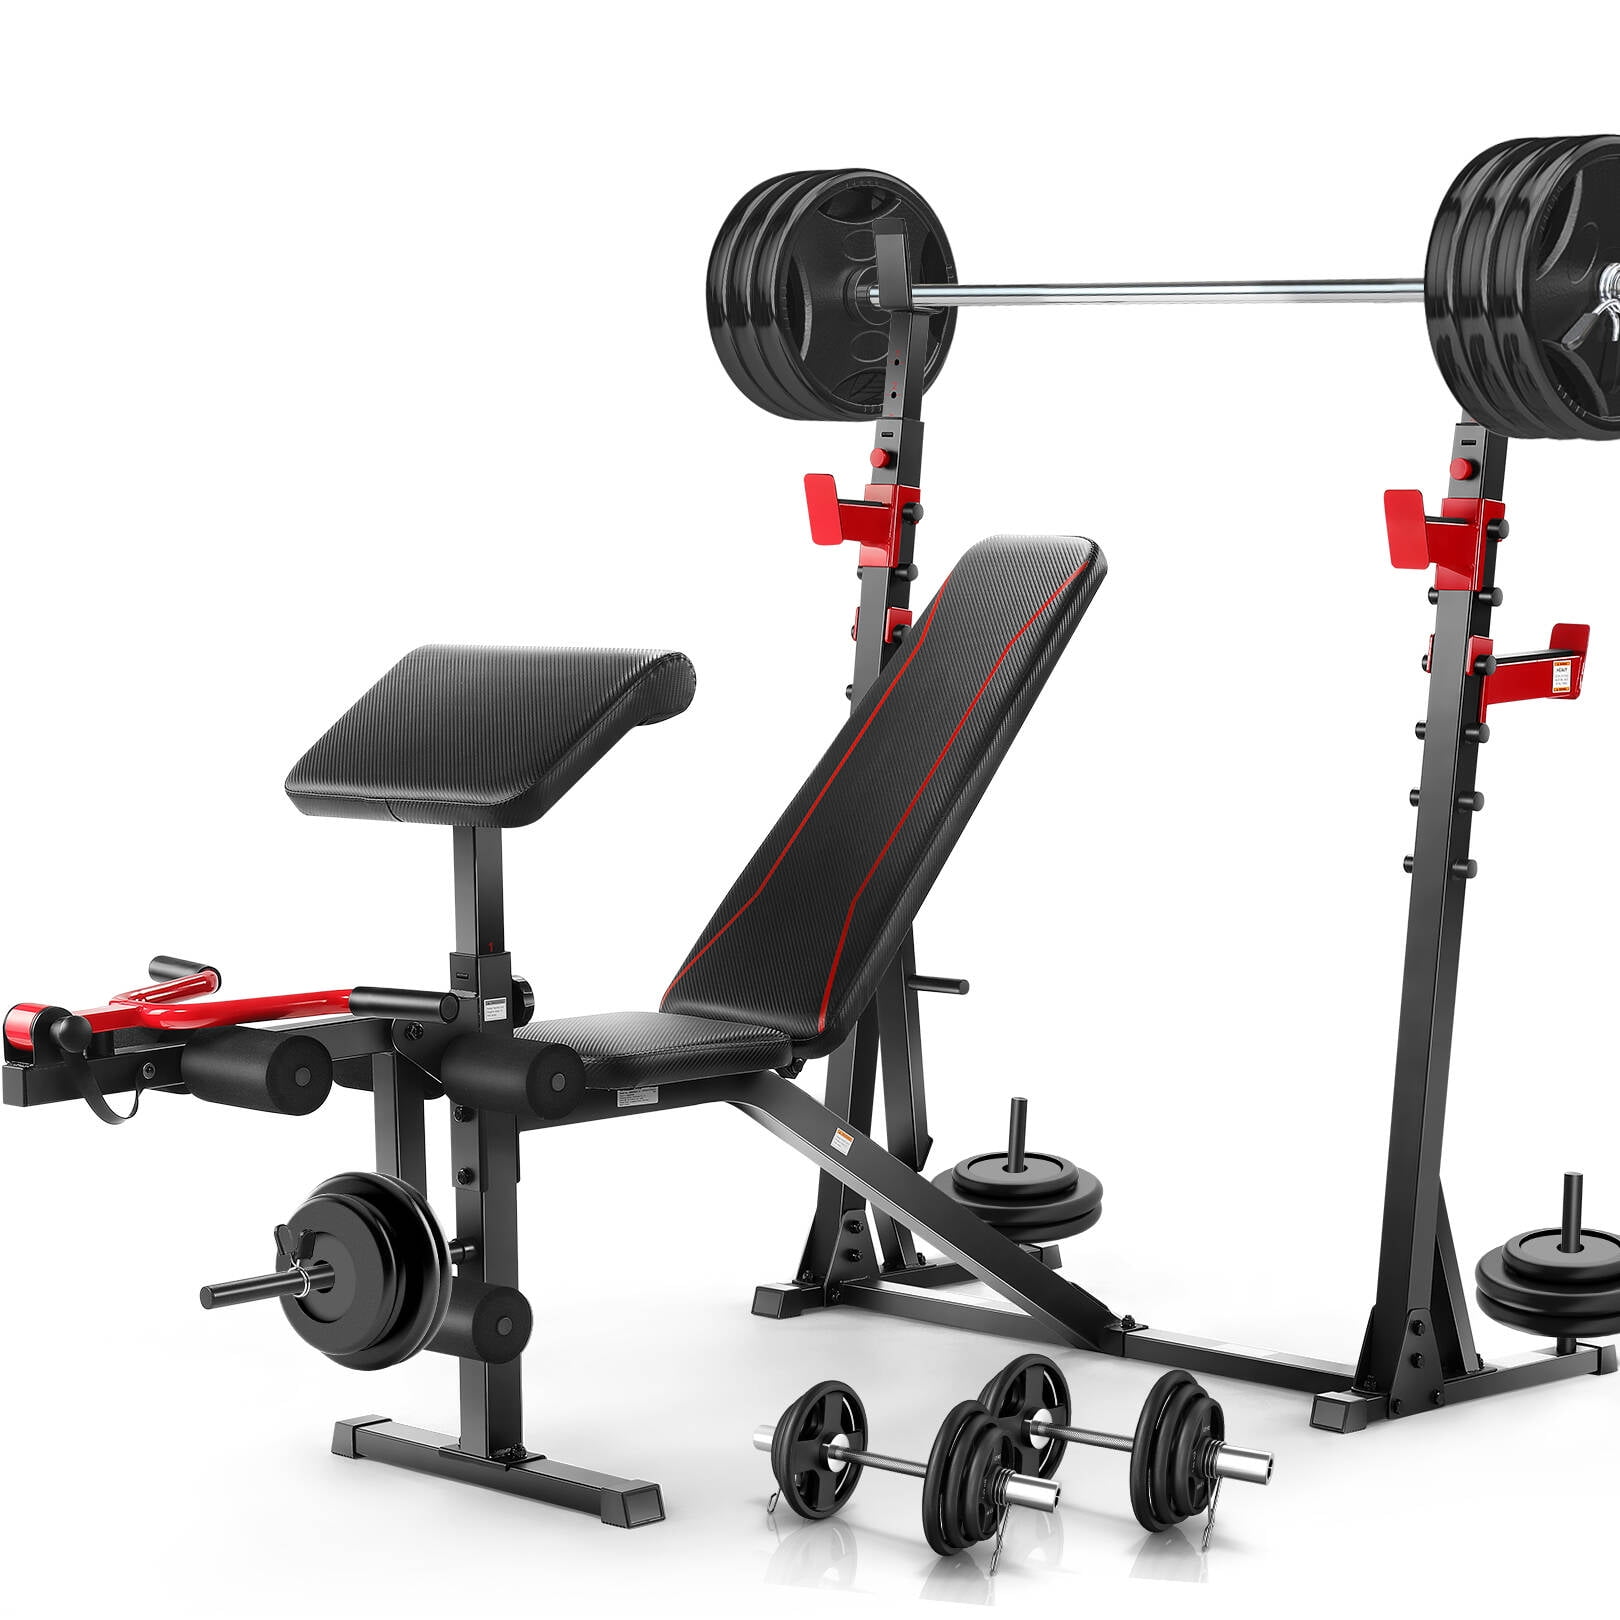 Body Exercise Workout Bench Press